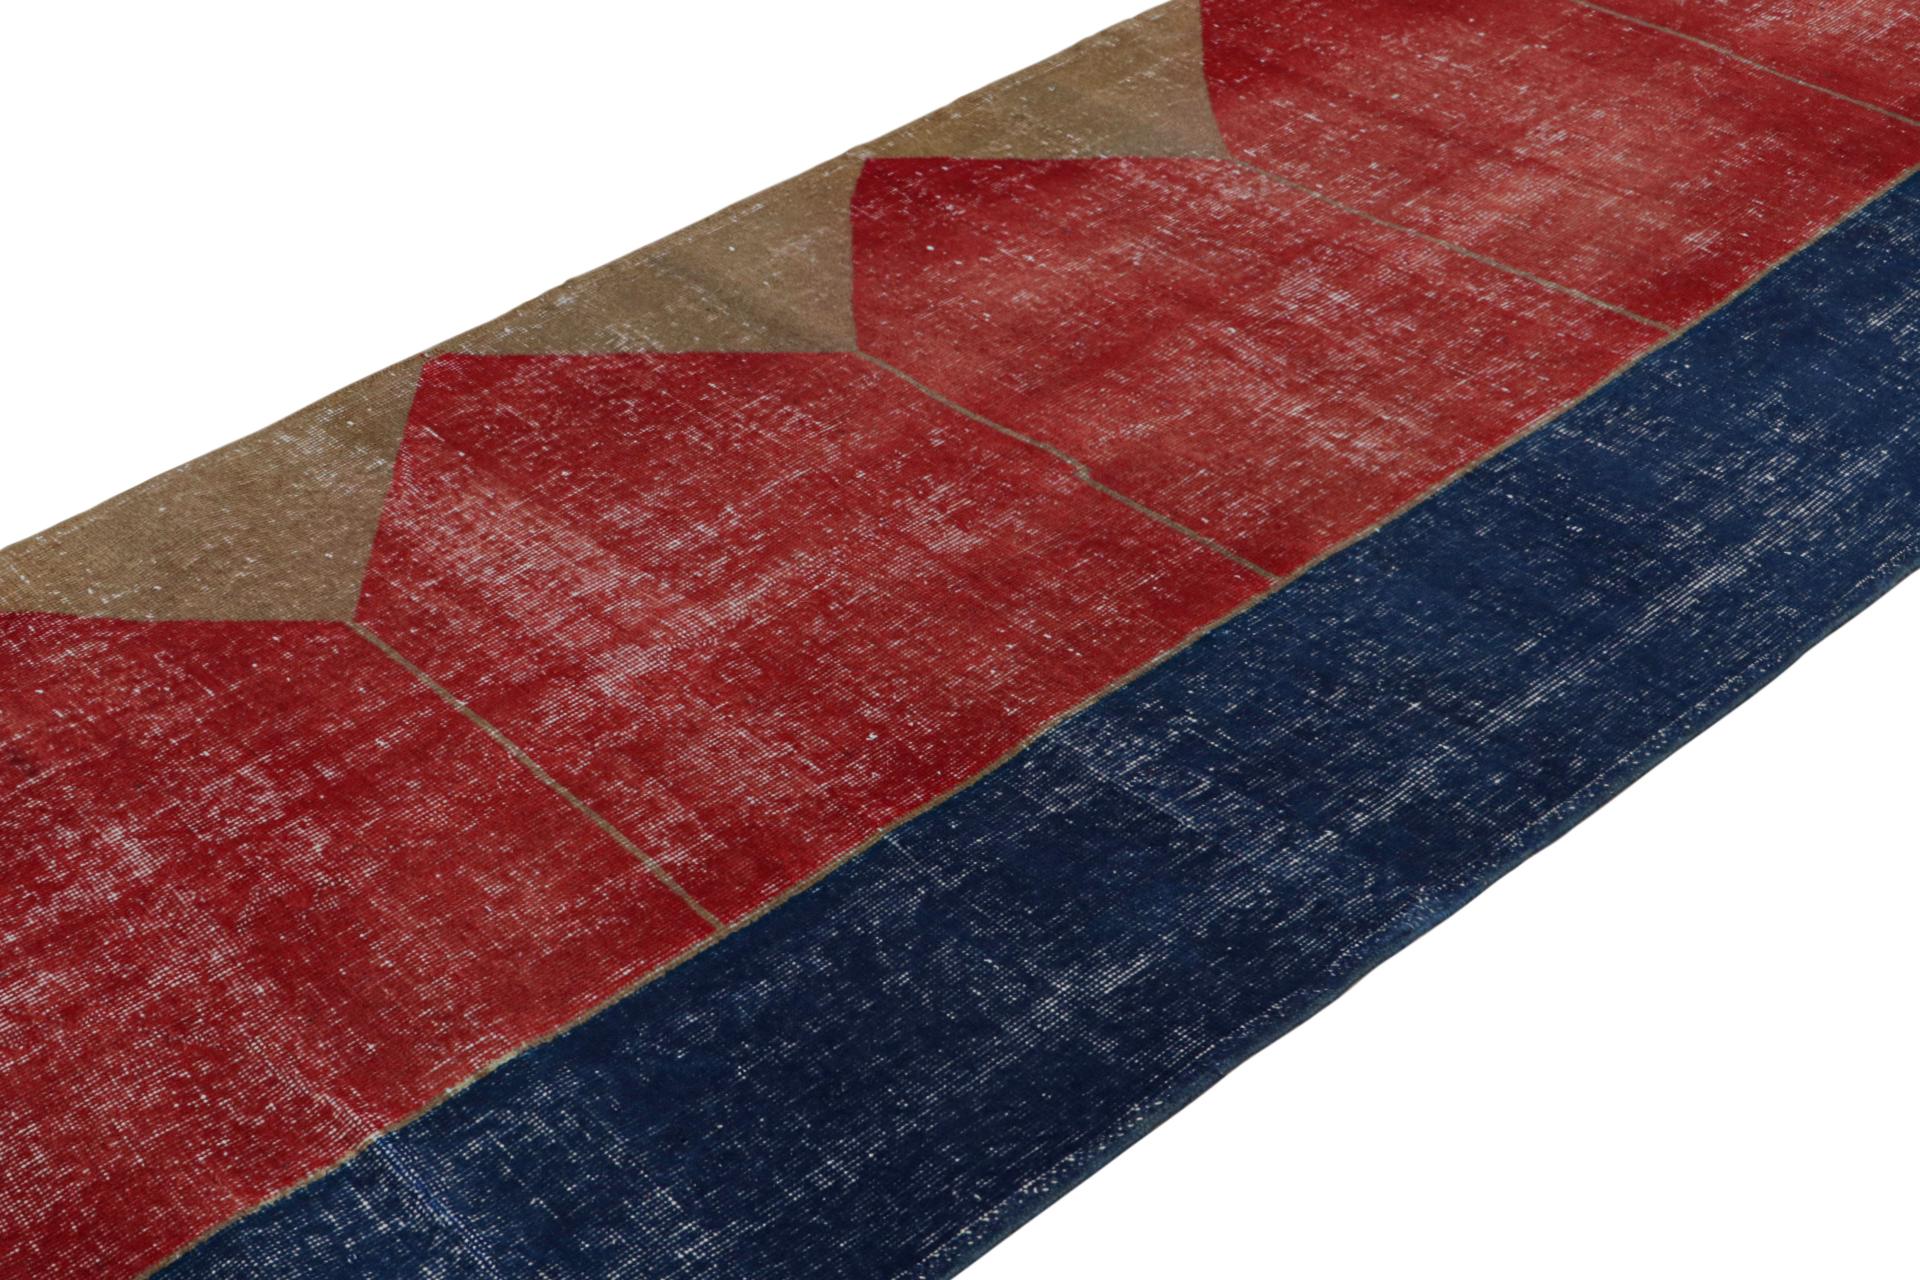 Hand knotted in wool, a vintage 4x13 Turkish runner rug circa 1950-1960 - latest to enter Rug & Kilim’s vintage selections.

On the Design:

The design is inspired by Saf rugs—a style of prayer rug known for this look. This rug draws a more